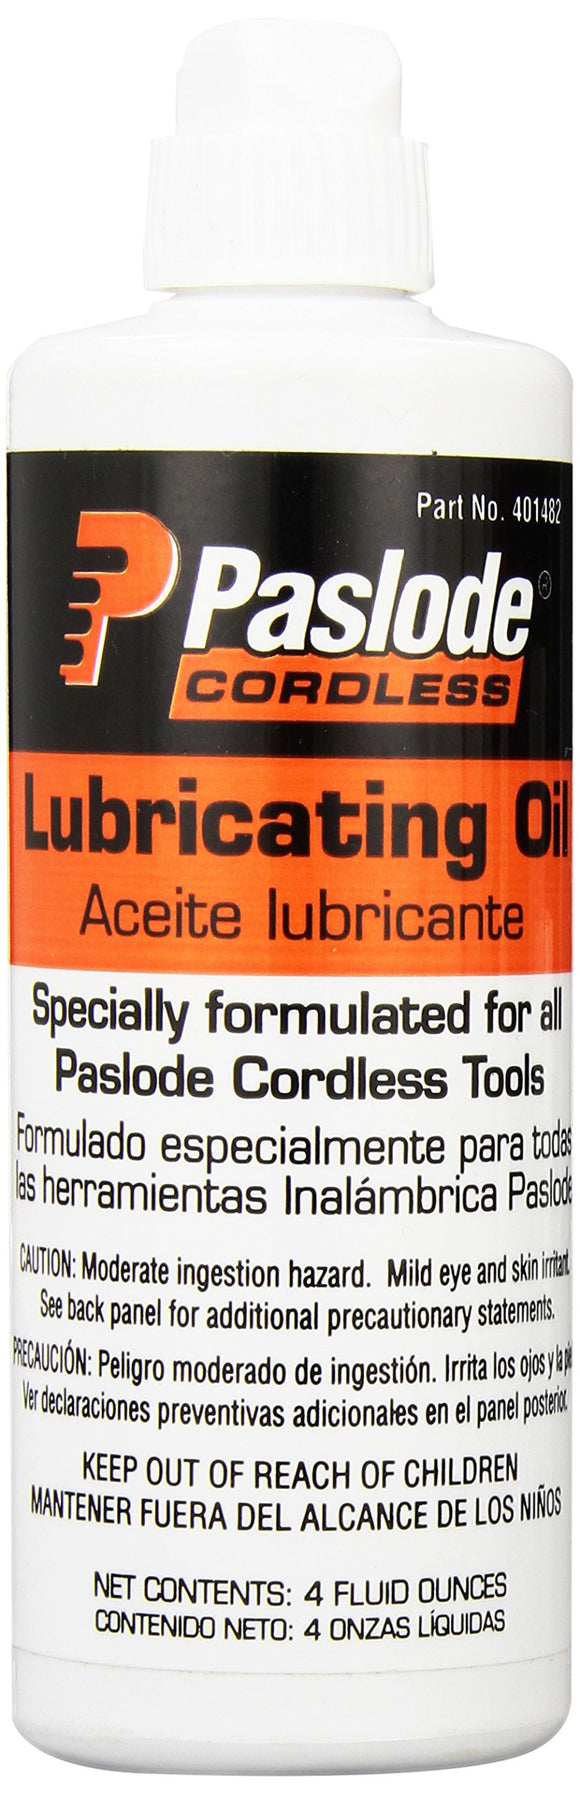 Paslode Cordless Lubrication Oil